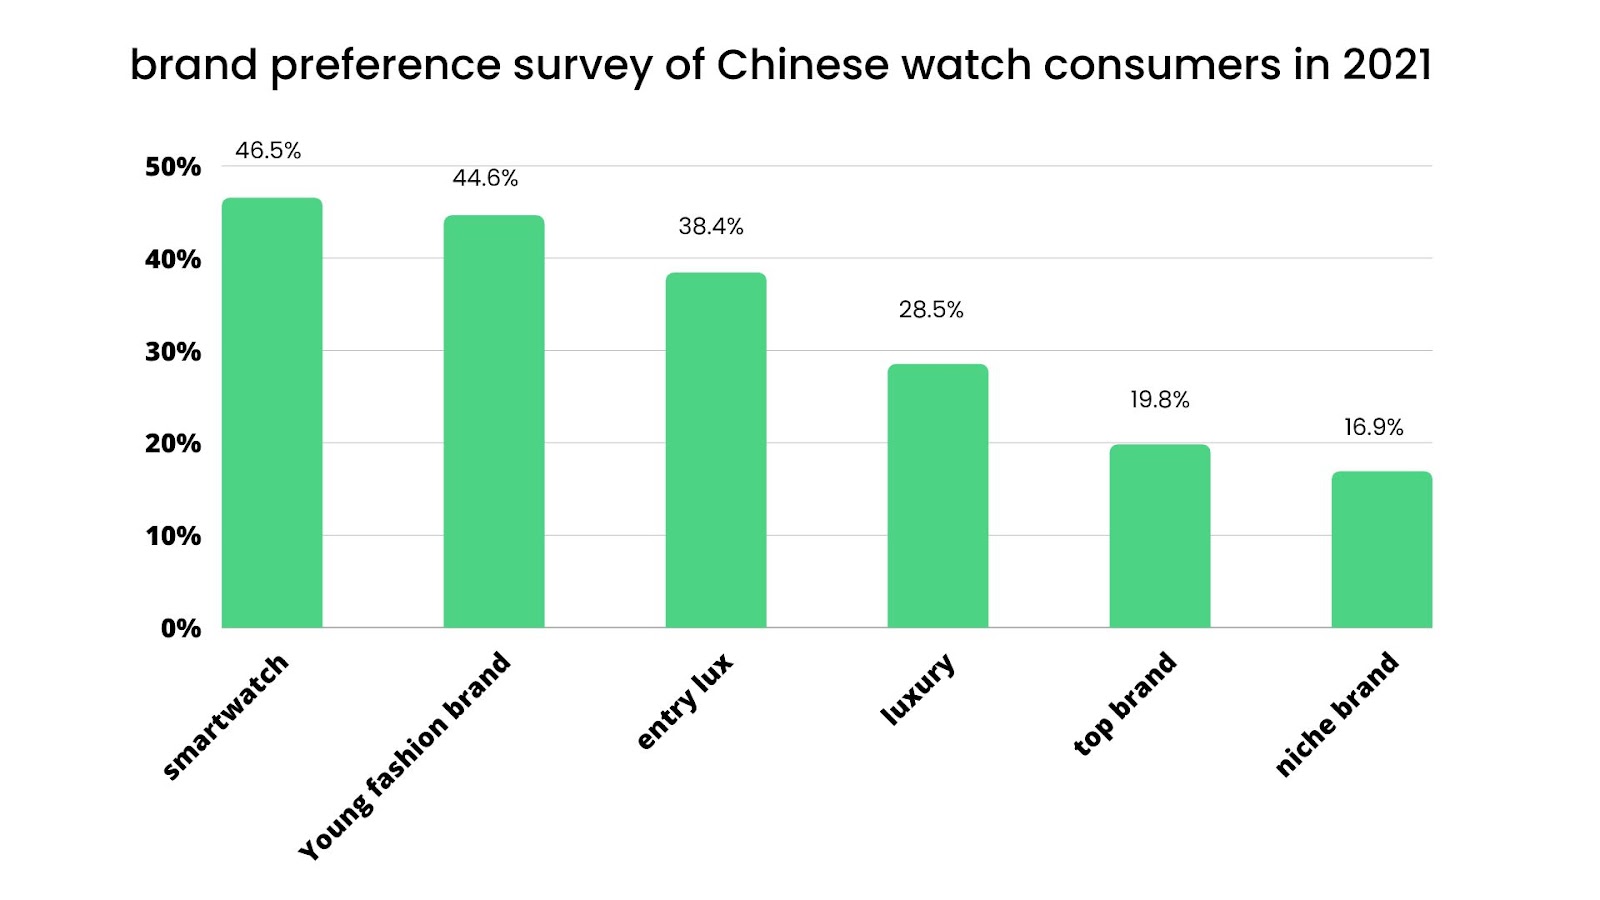 Table: Brand preference survey of Chinese watch consumers in 2021